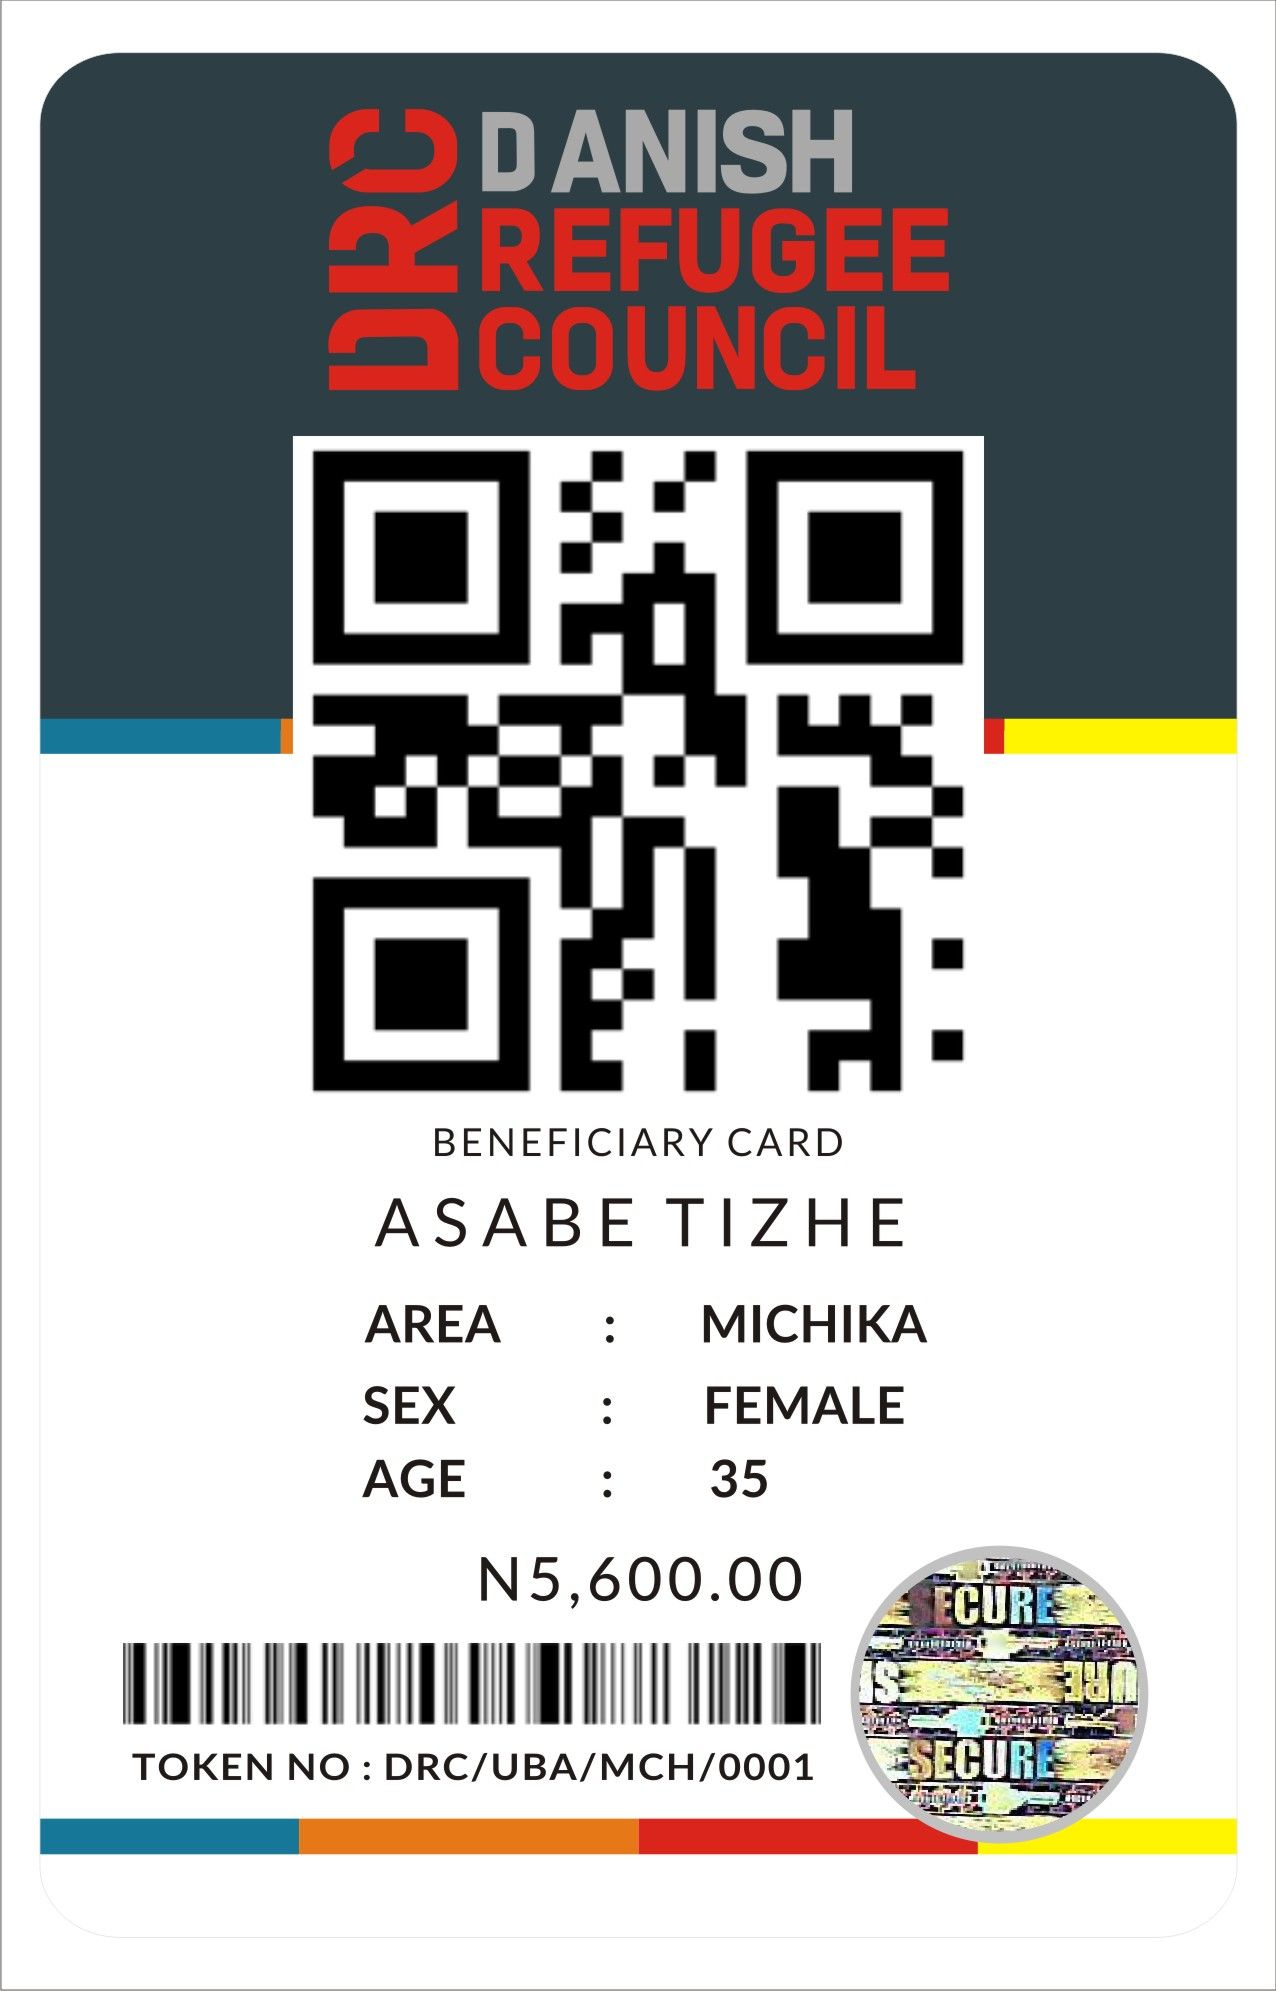 CALL EMMANUEL ON 08176499649 TO PRINT QR CODE LABELS, BARCODE LABELS, AUTHENTICATION LABELS ETC